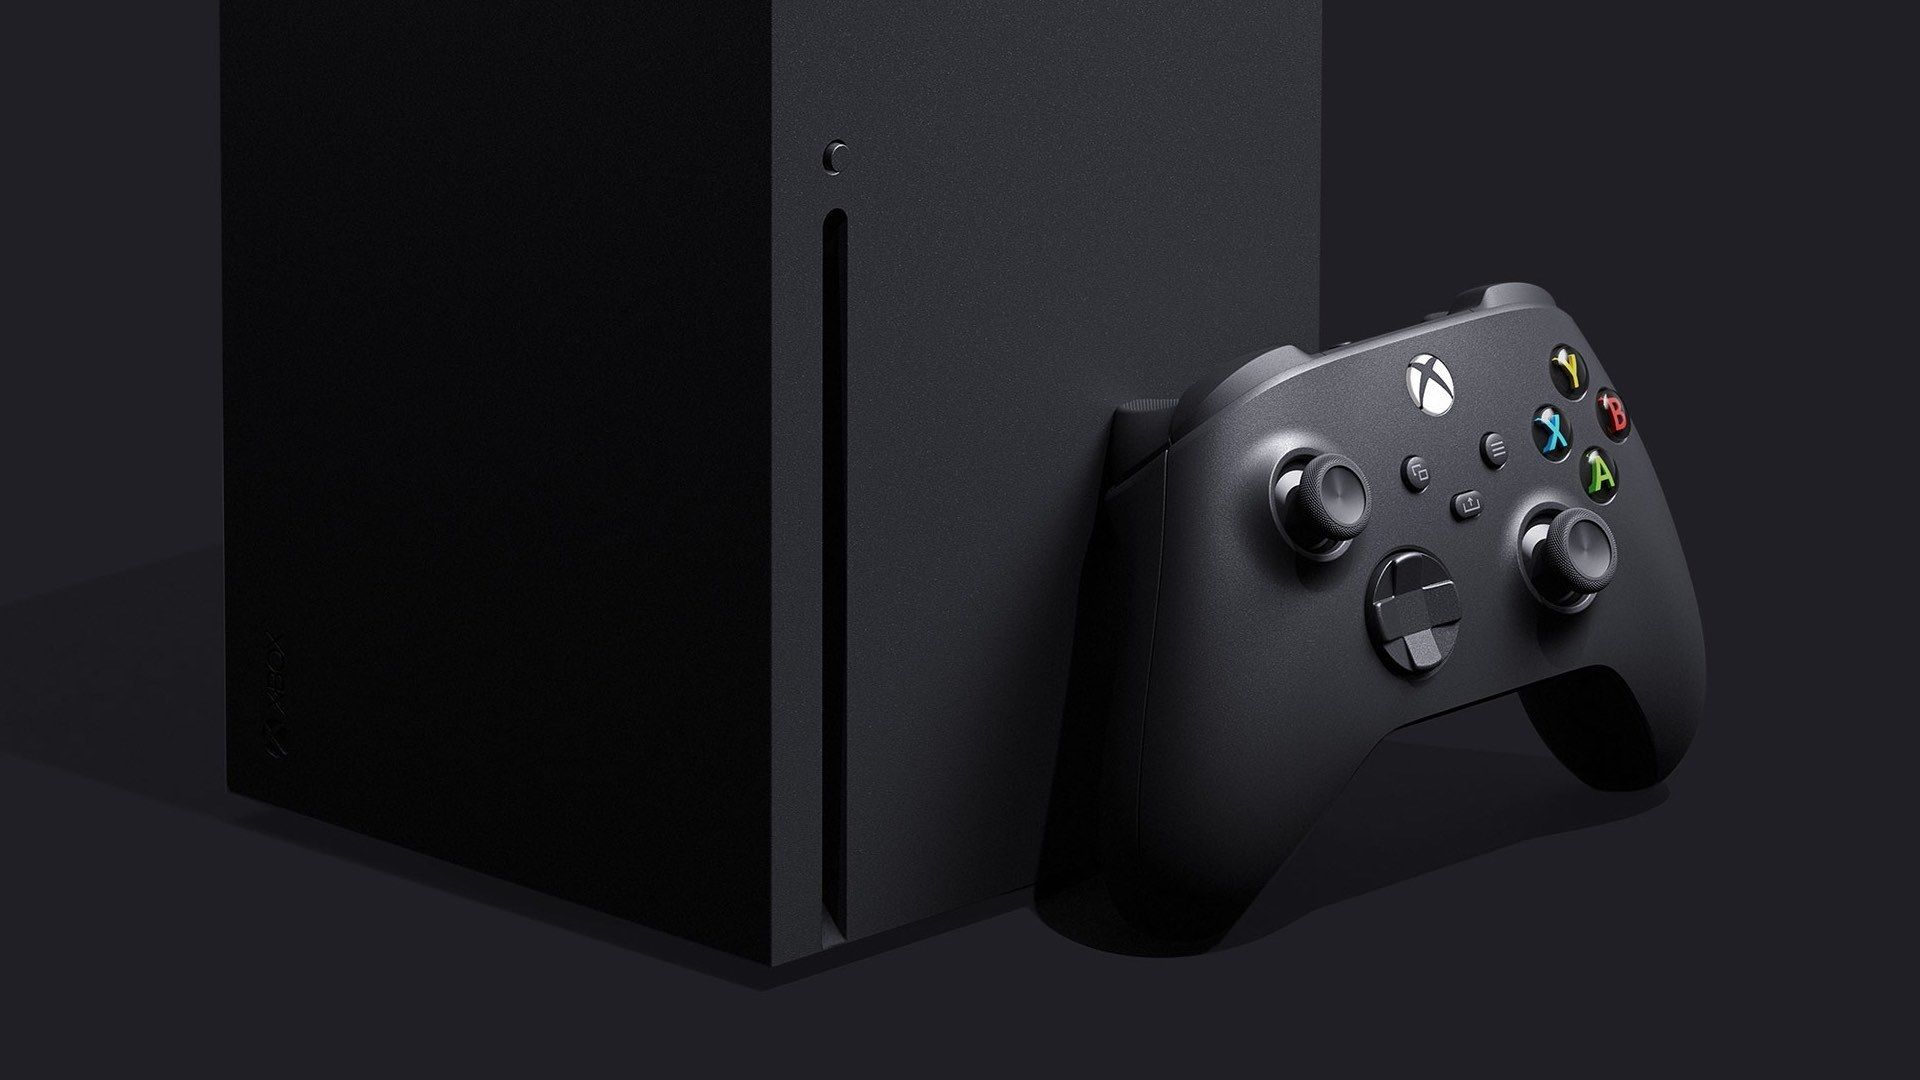 Best Xbox Series X accessories - Headsets, controllers and more